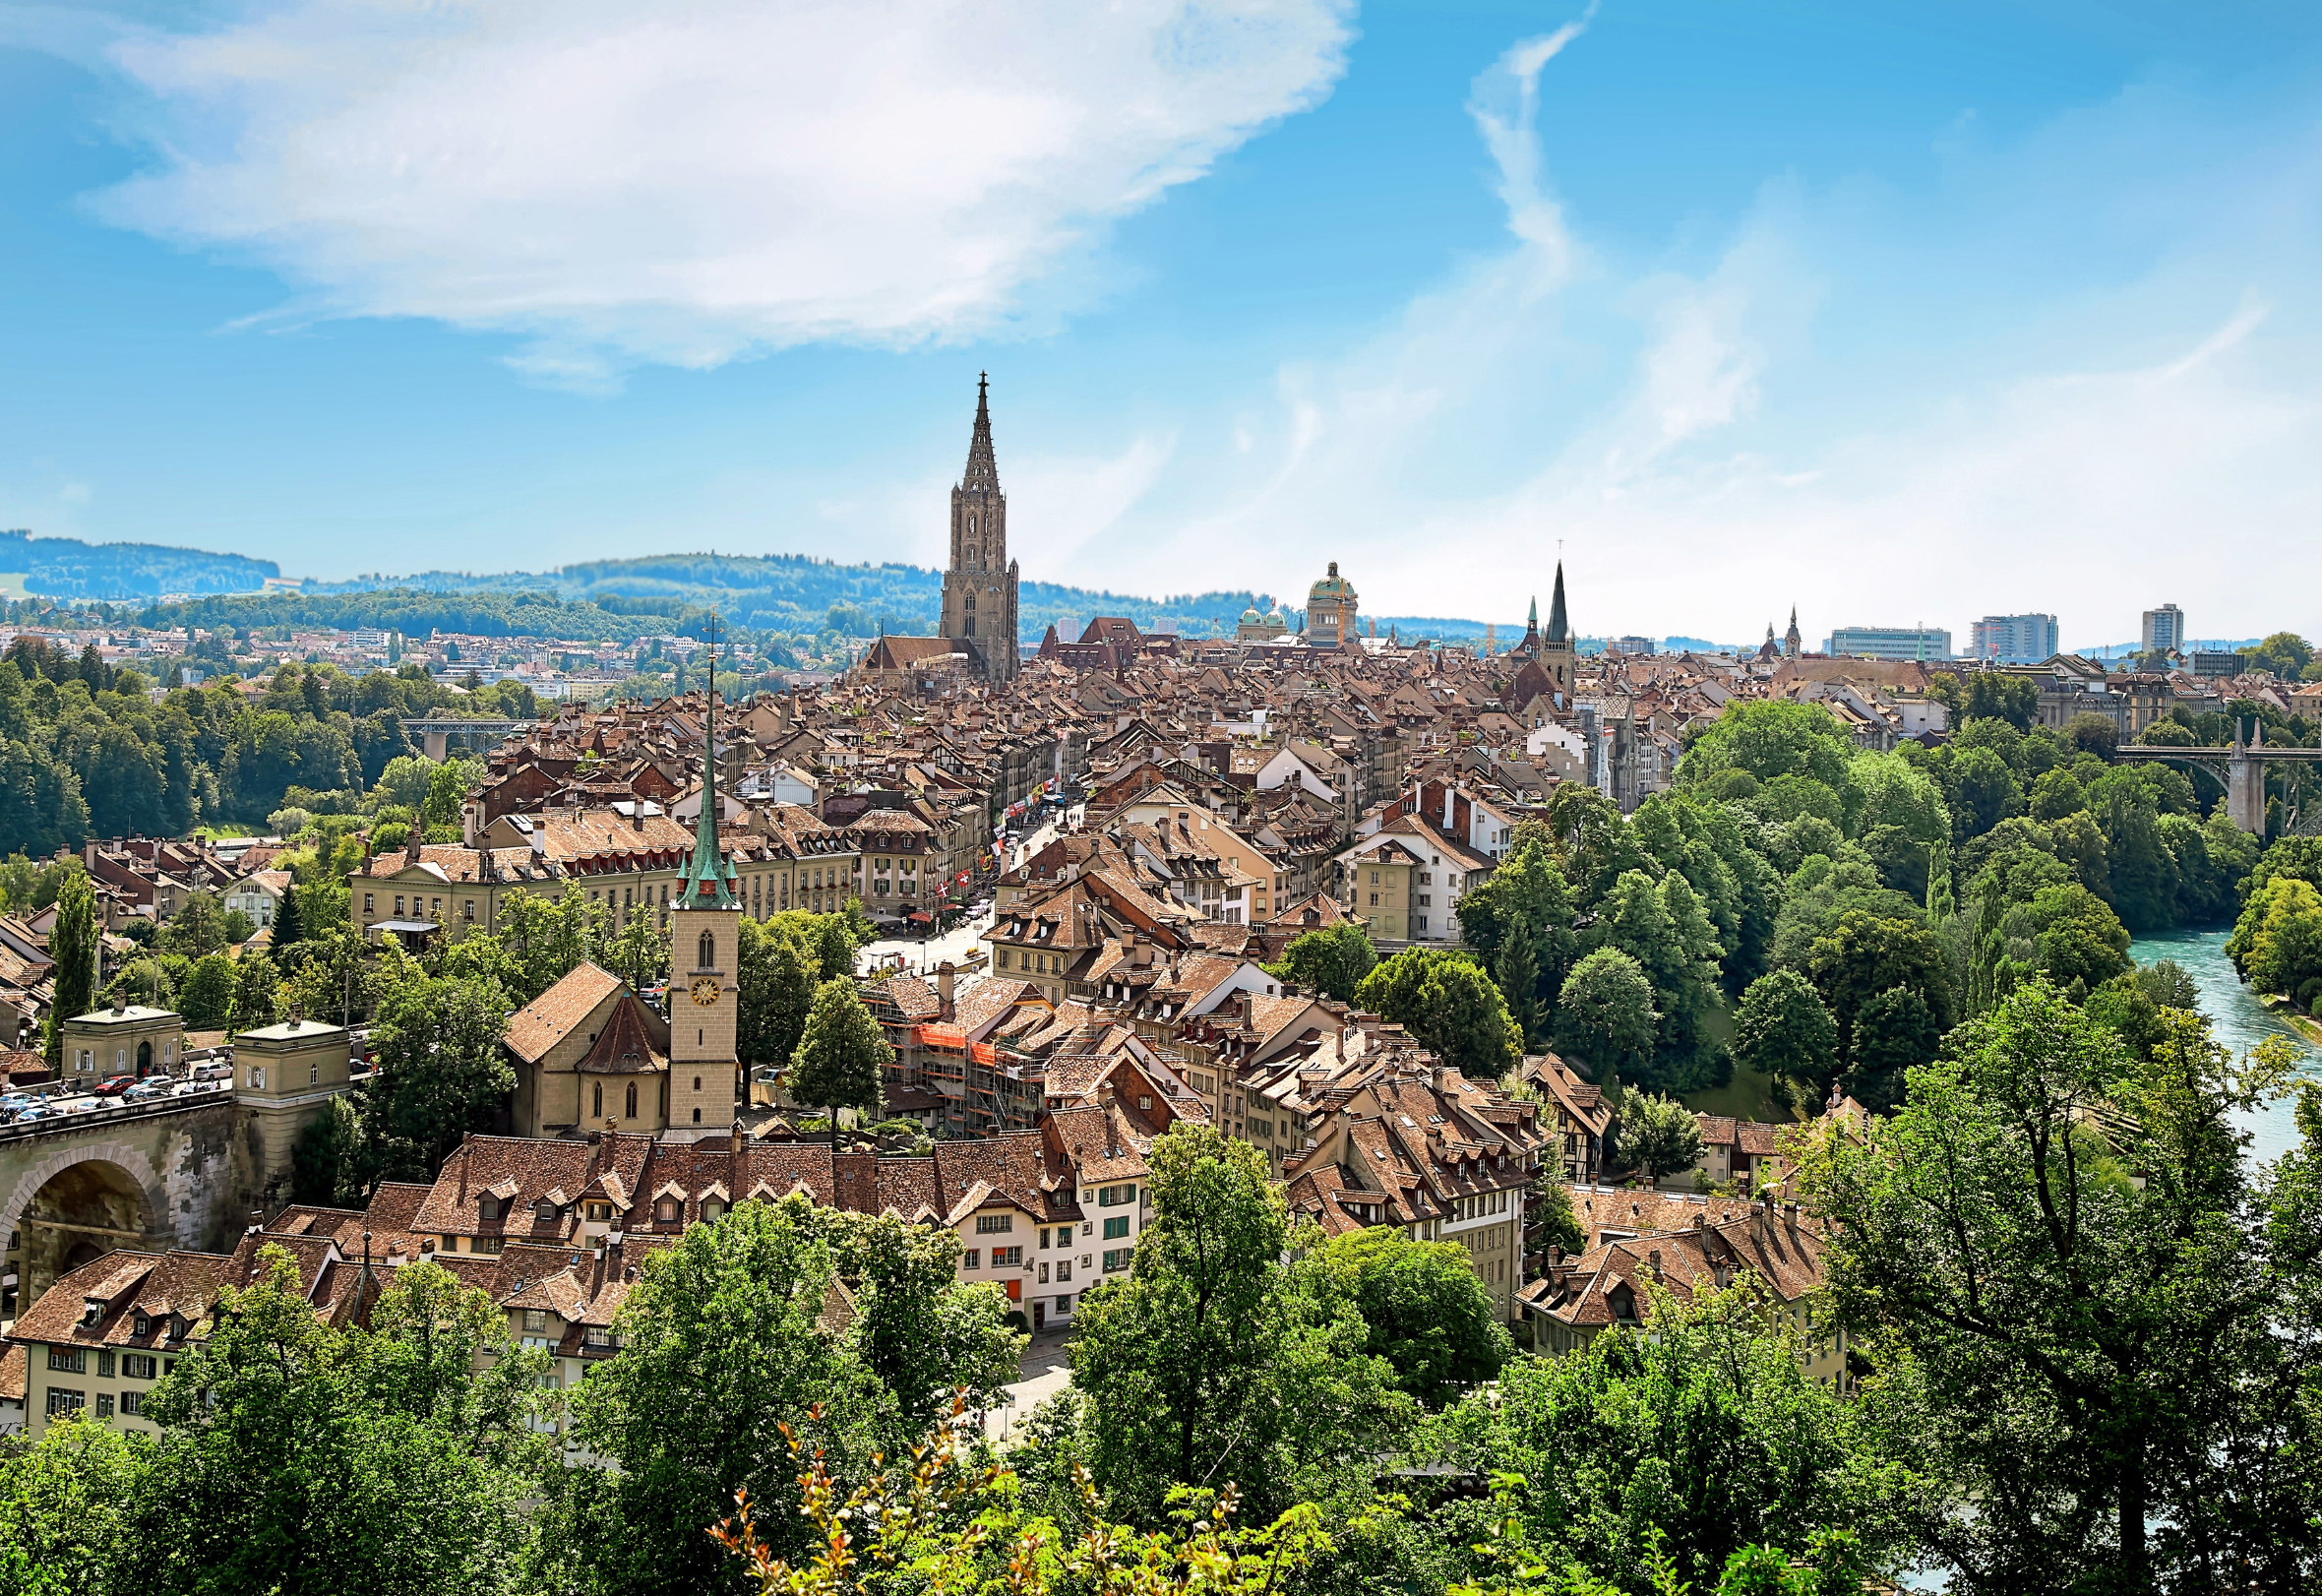 This marks the third consecutive year Bern has held this prestigious position, attributed to its outstanding facilities, minimal air pollution, and low crime rates.